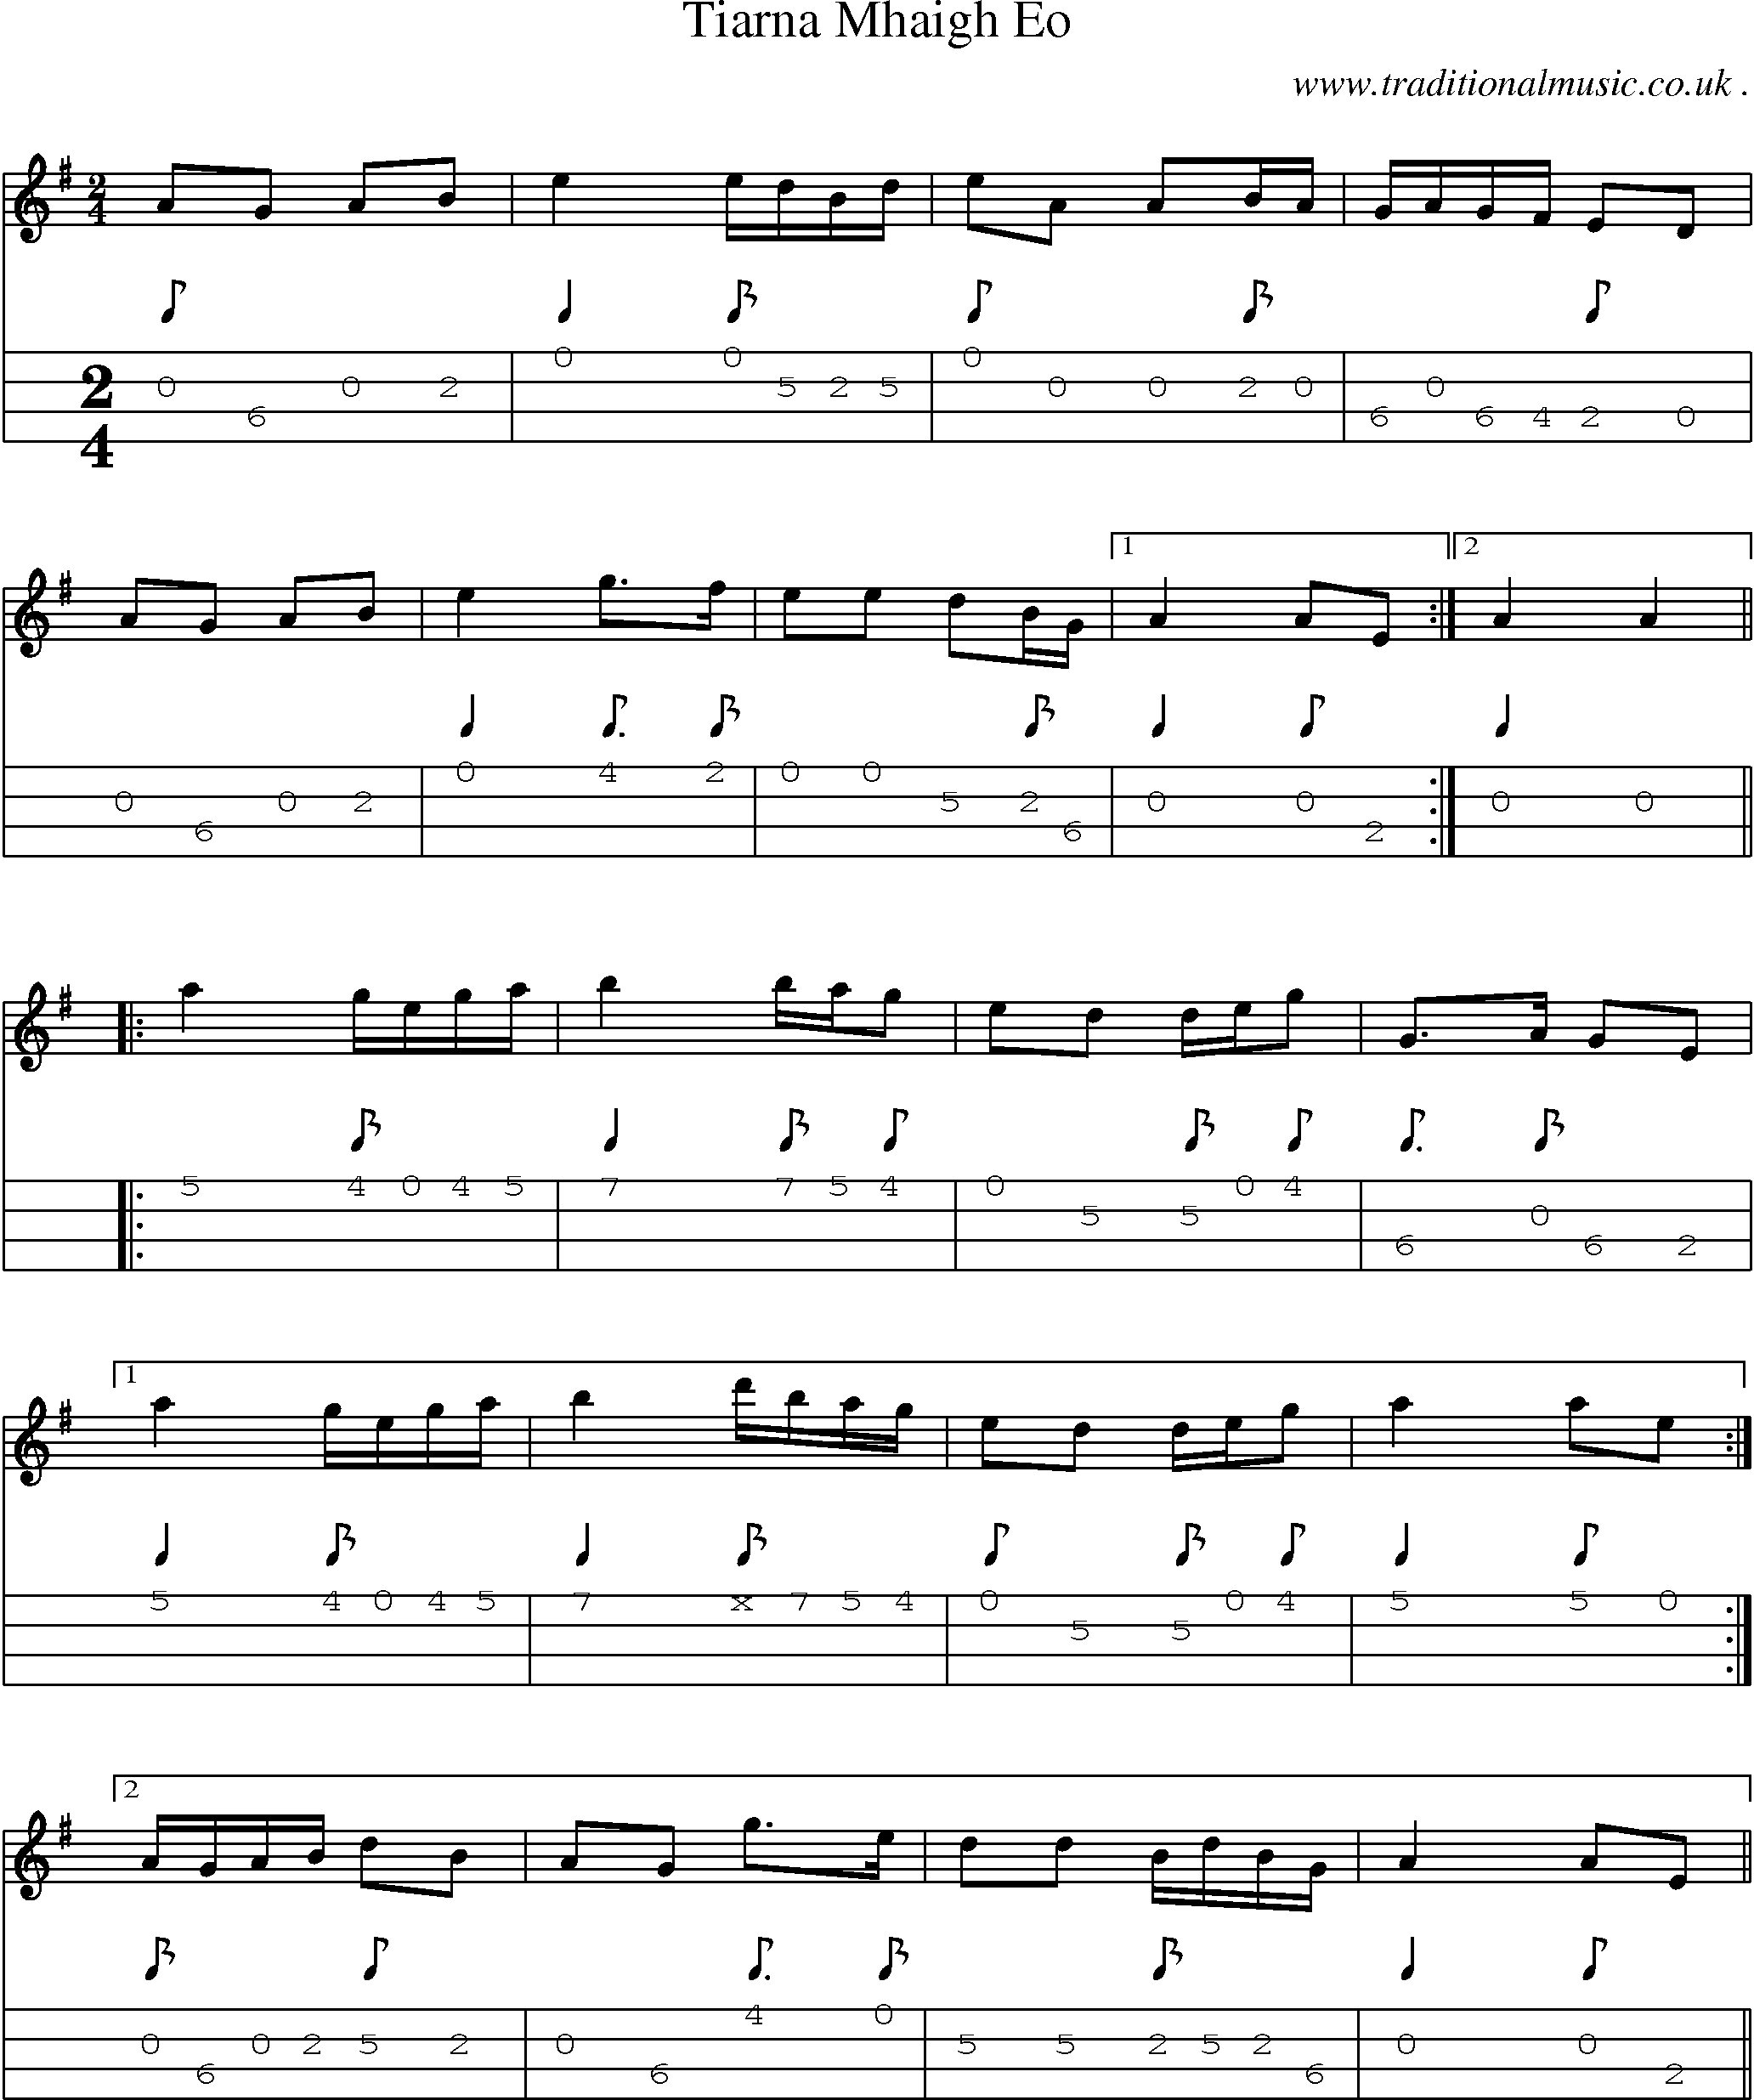 Sheet-Music and Mandolin Tabs for Tiarna Mhaigh Eo